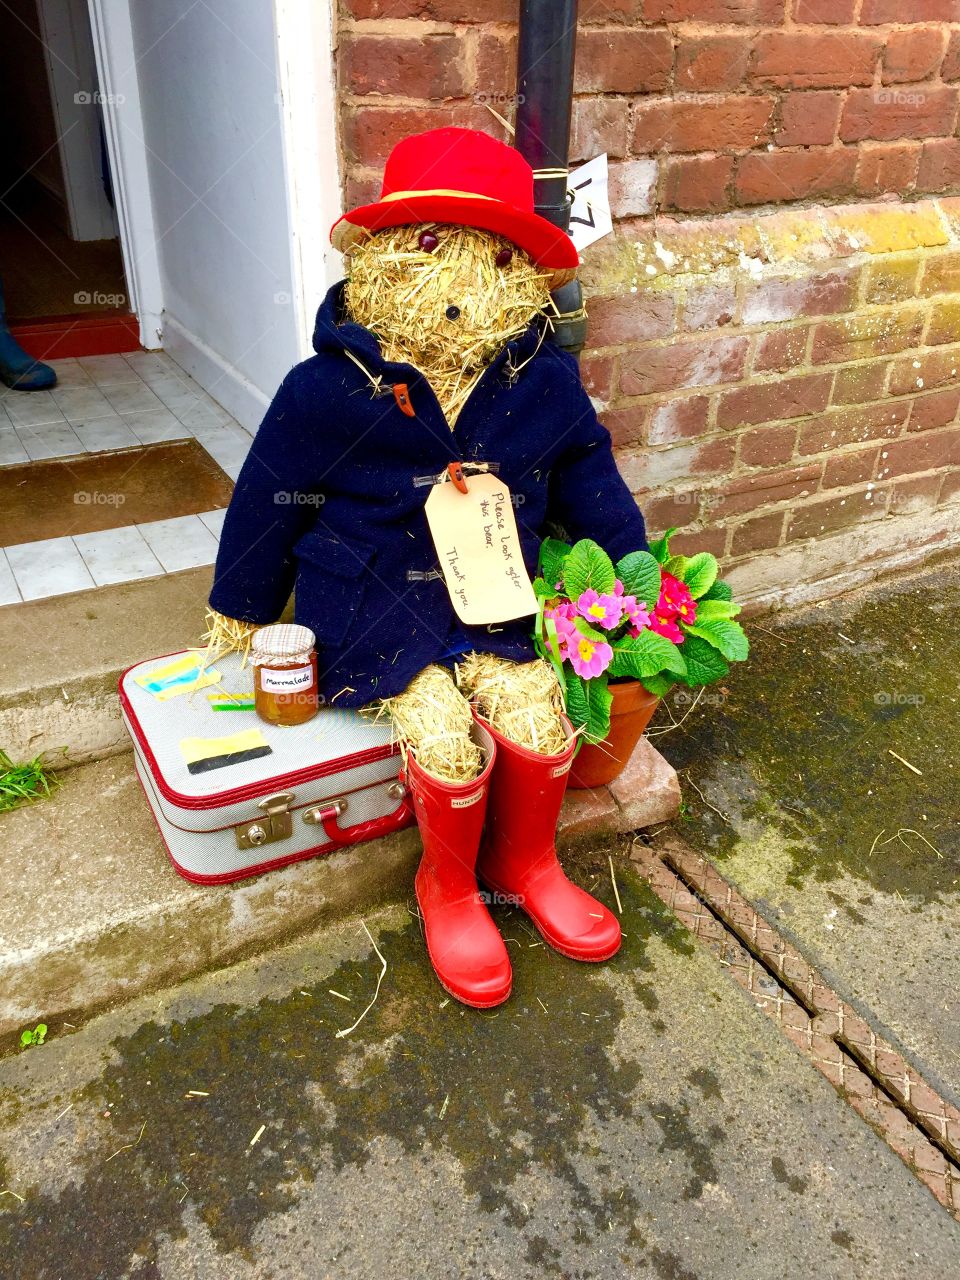 Our Paddington scarecrow came 1st in the village competition!